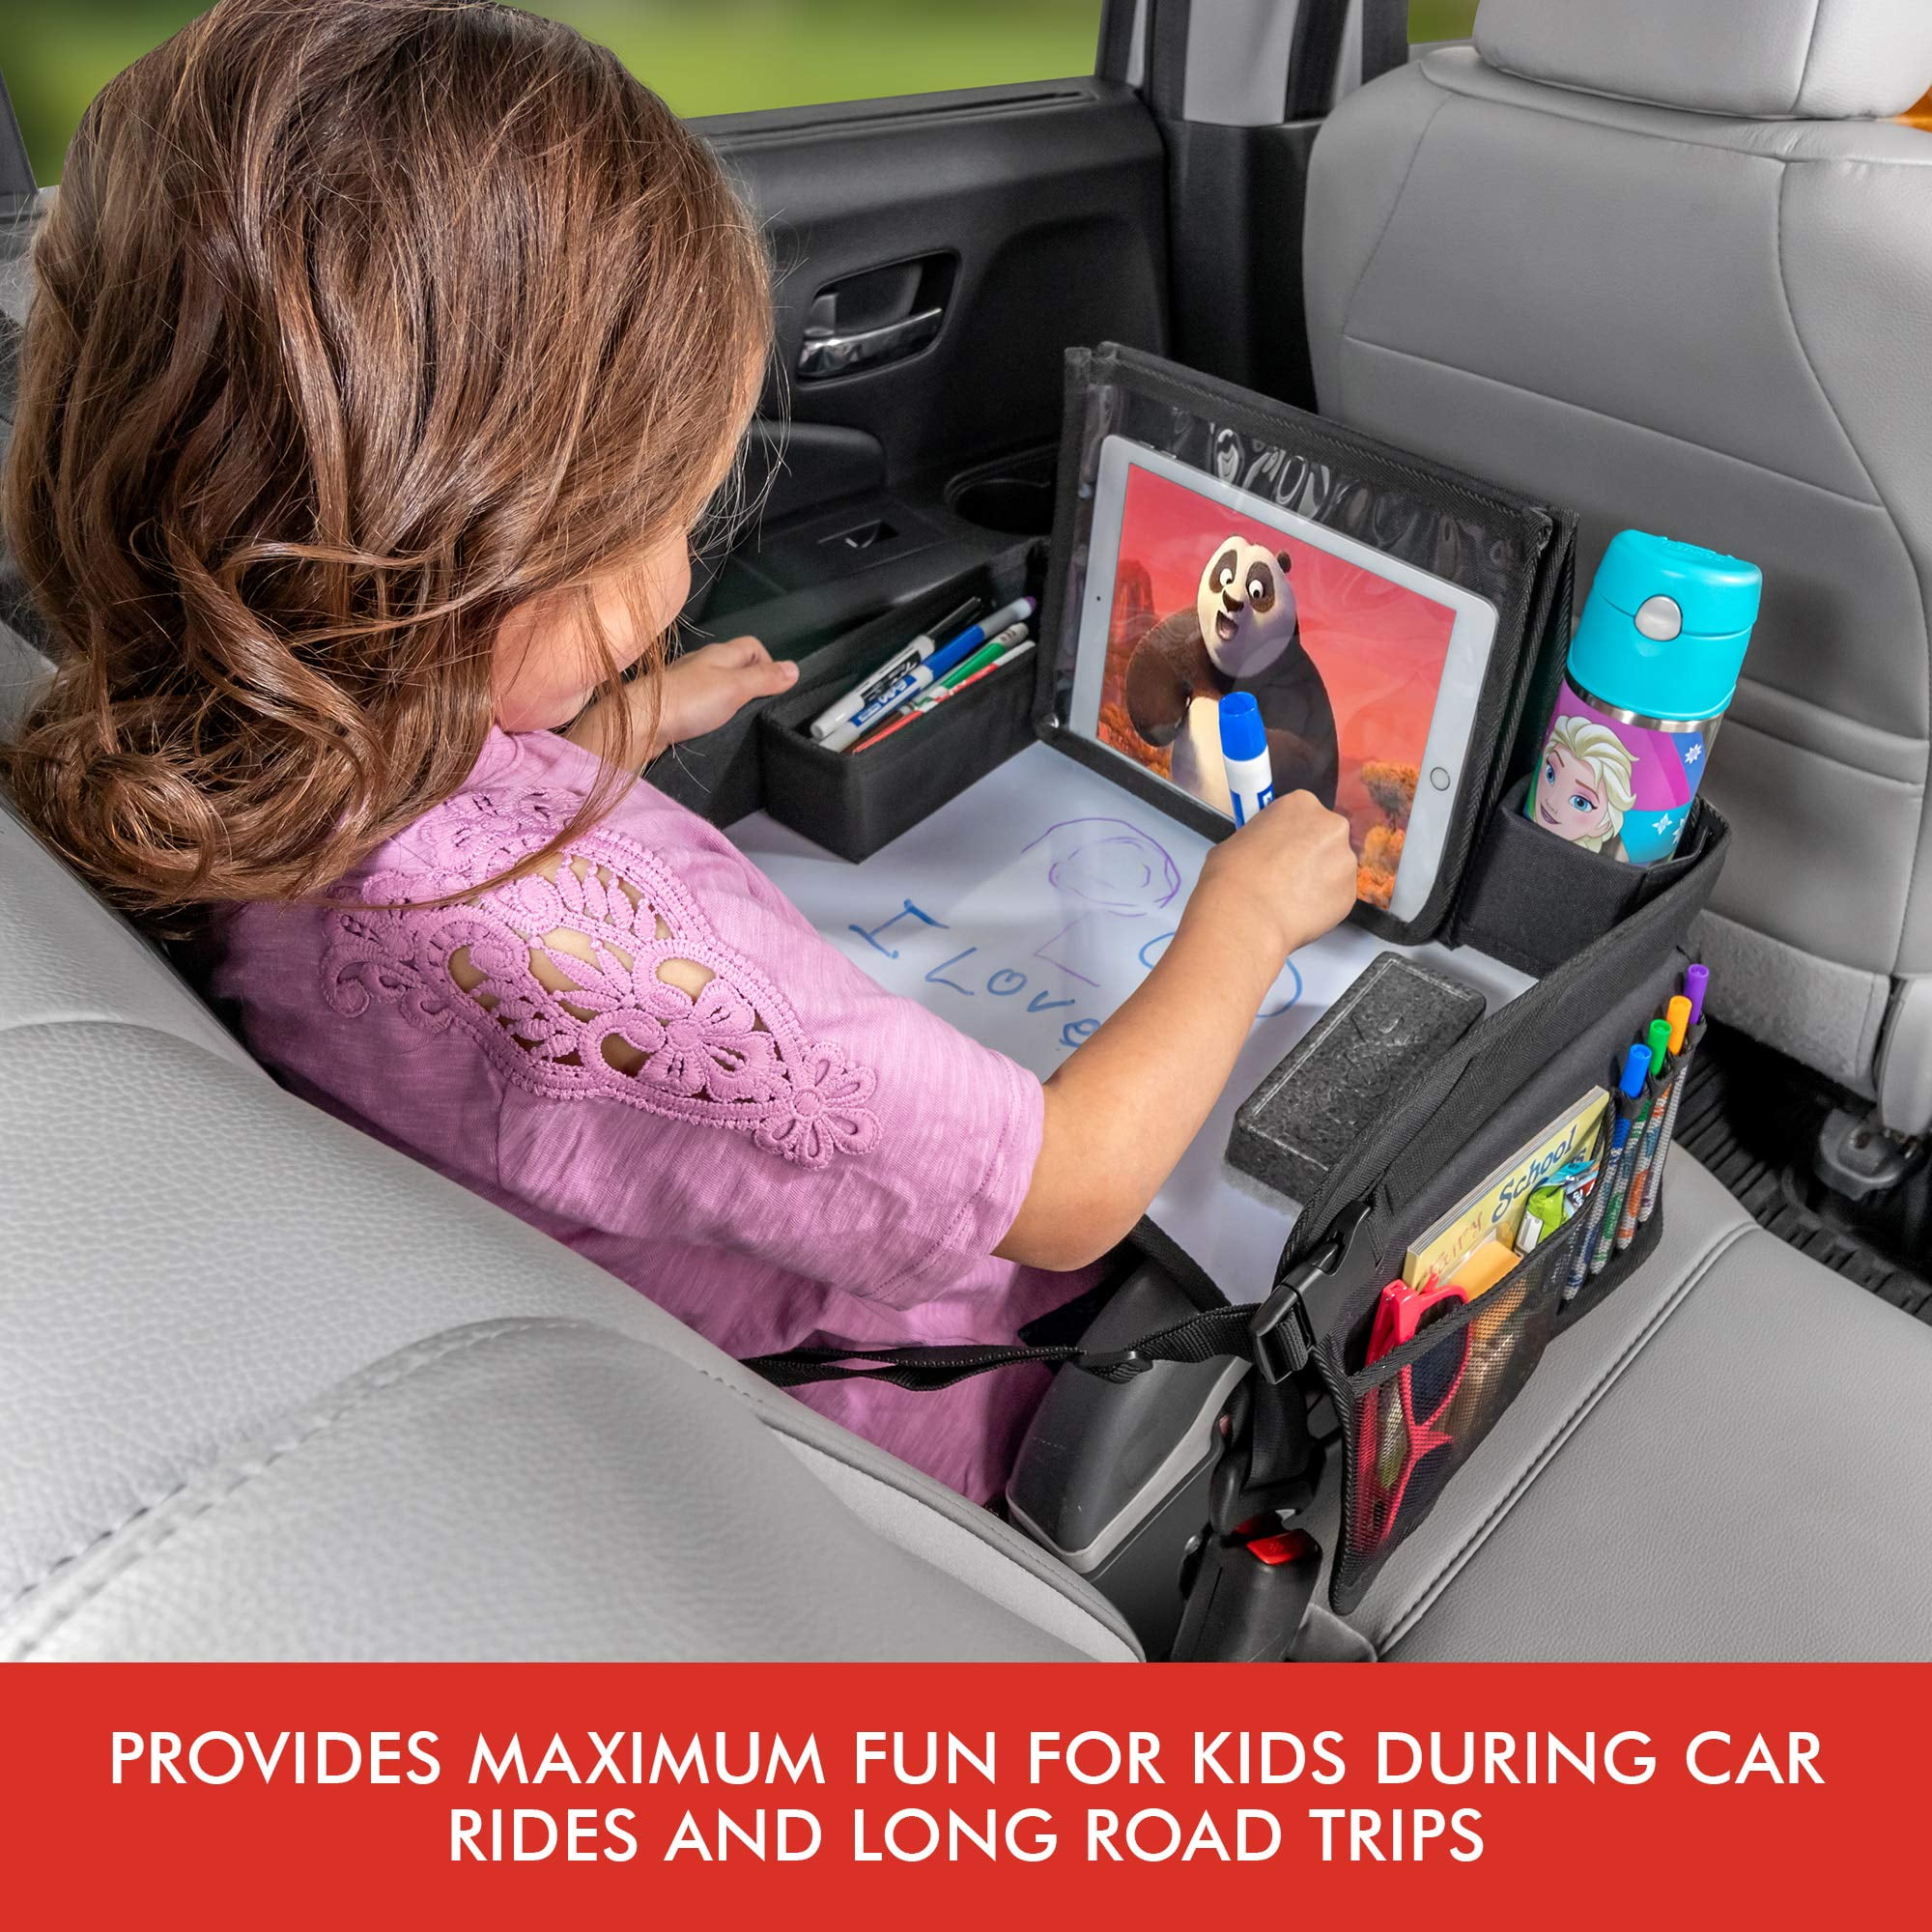 Kids Carseat Travel Stroller Table Great for Road Trips Airplane Seat Organizer Lap Desk for Eating Activity Tray Car Travel Tray for Kids Ipad Holder Stand 